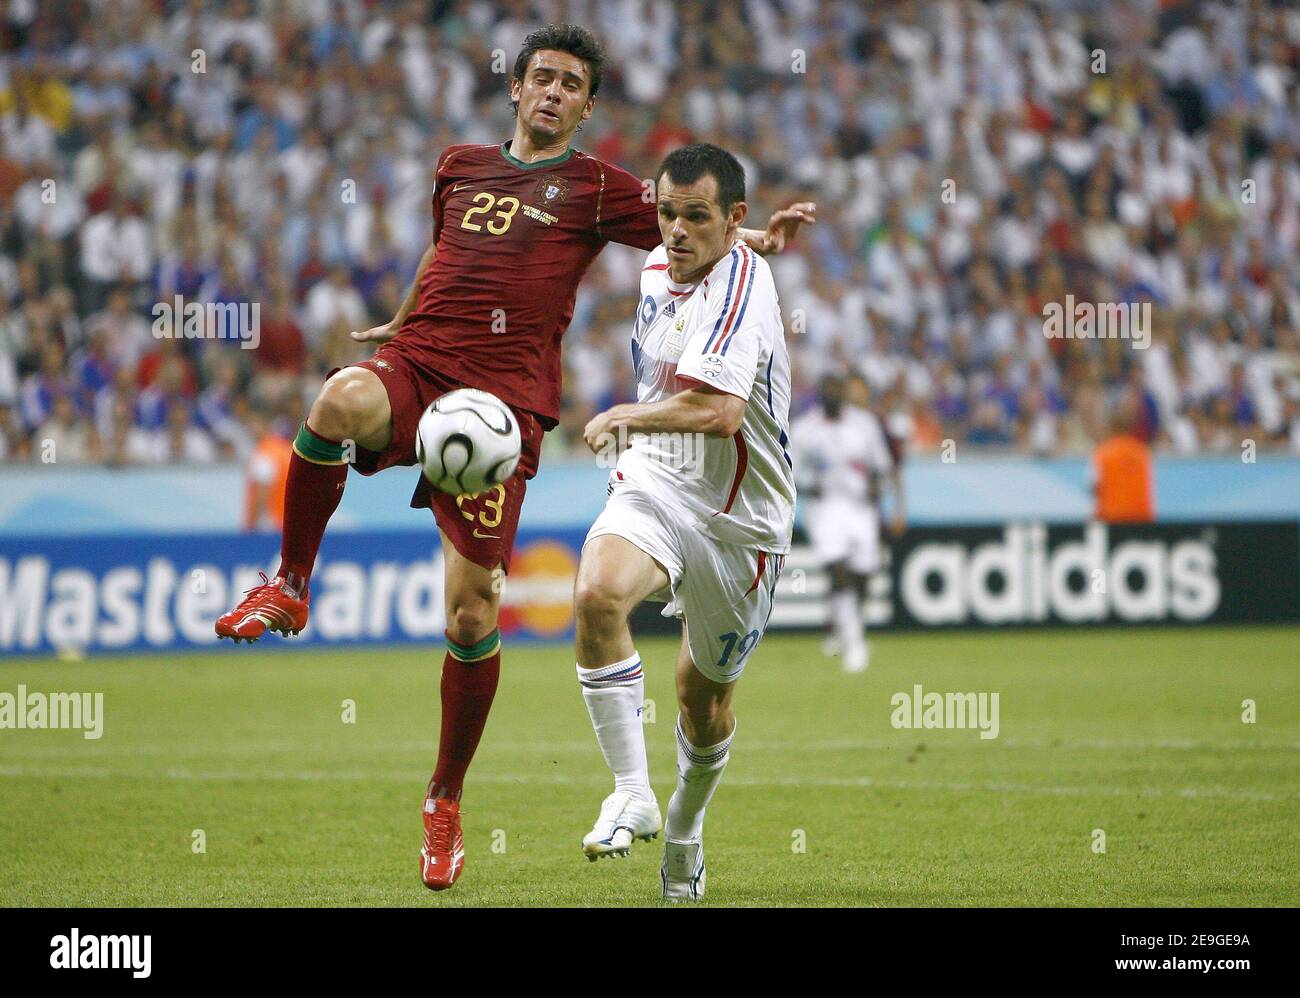 France's Willy Sagnol and Portugal's Postiga Helder battle for the ball during the World Cup 2006, semi-final, France vs Portugal at the Allianz-Arena stadium in Munich, Germany on July 5, 2006. France won 1-0 and advanced to the final. Photo by Christian Liewig/ABACAPRESS.COM Stock Photo